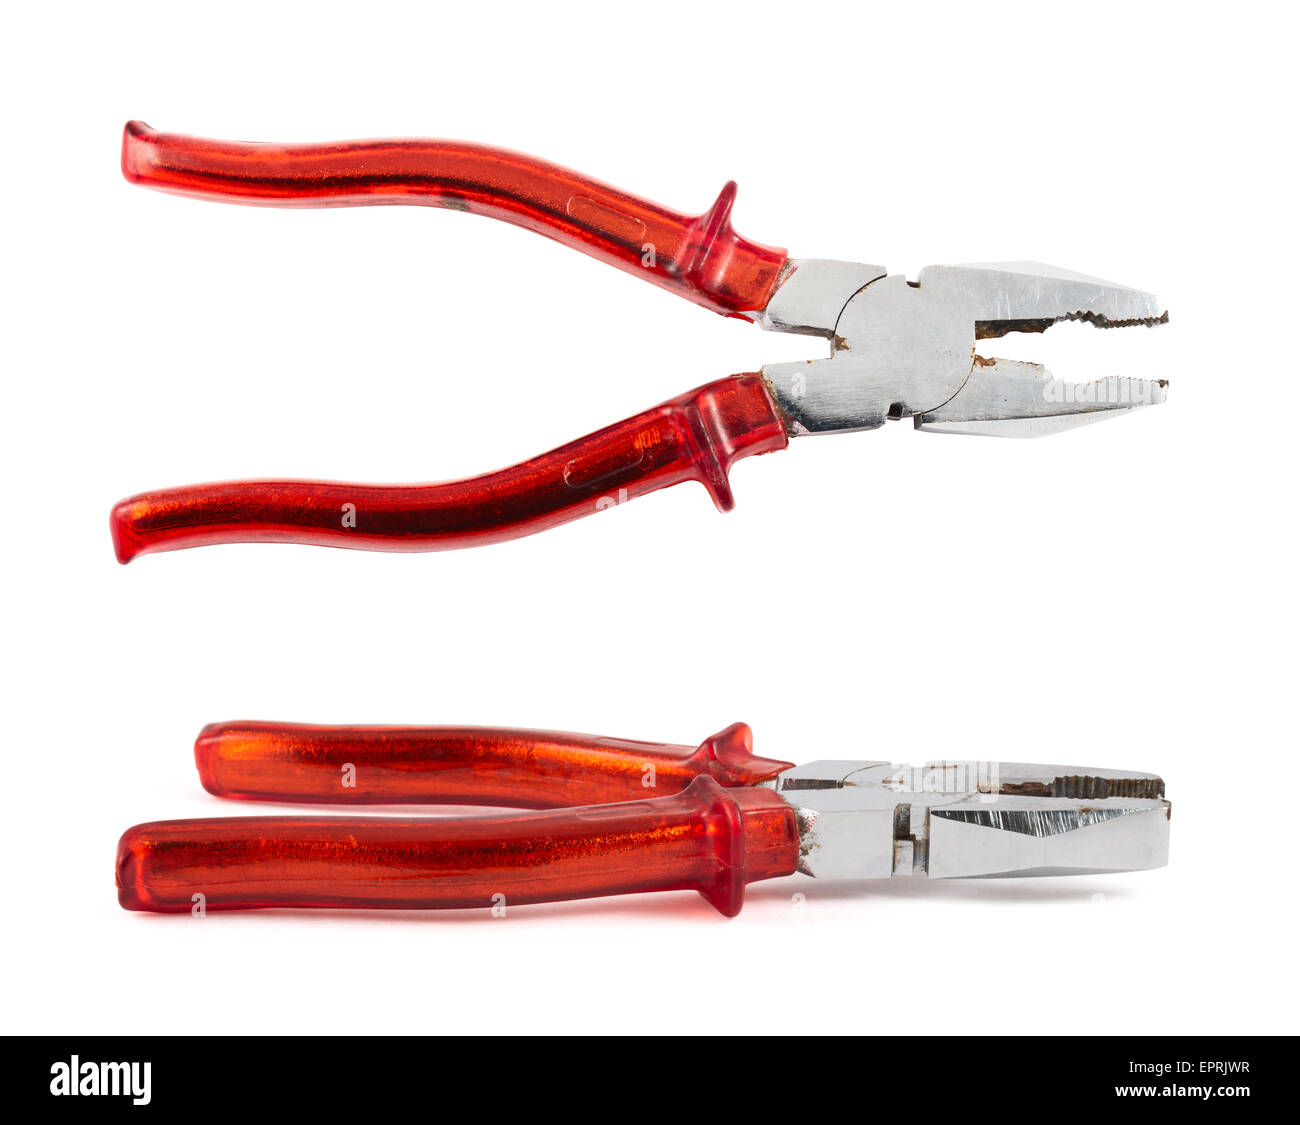 Lineman's combination pliers hand tool isolated Stock Photo